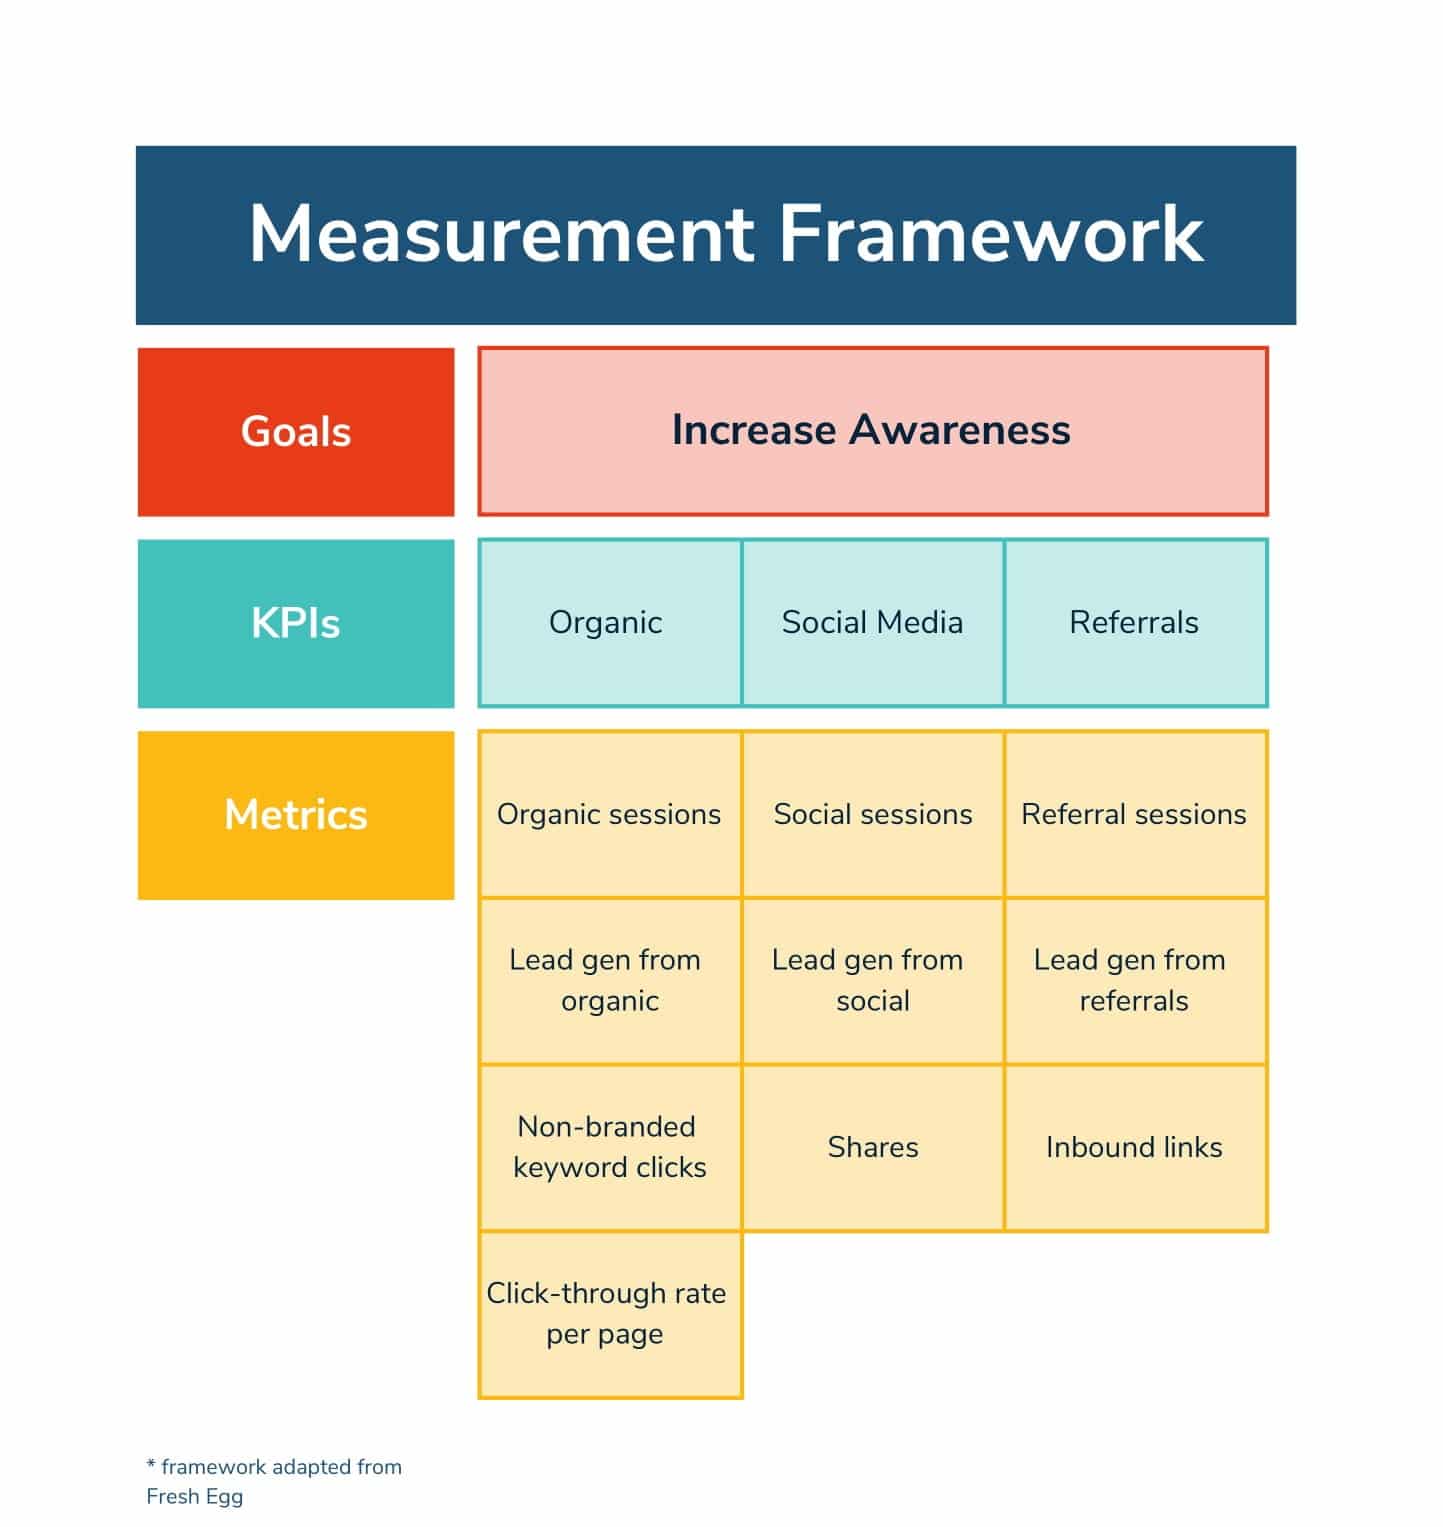 Measurement Framework that Uplift Content uses with it's customers